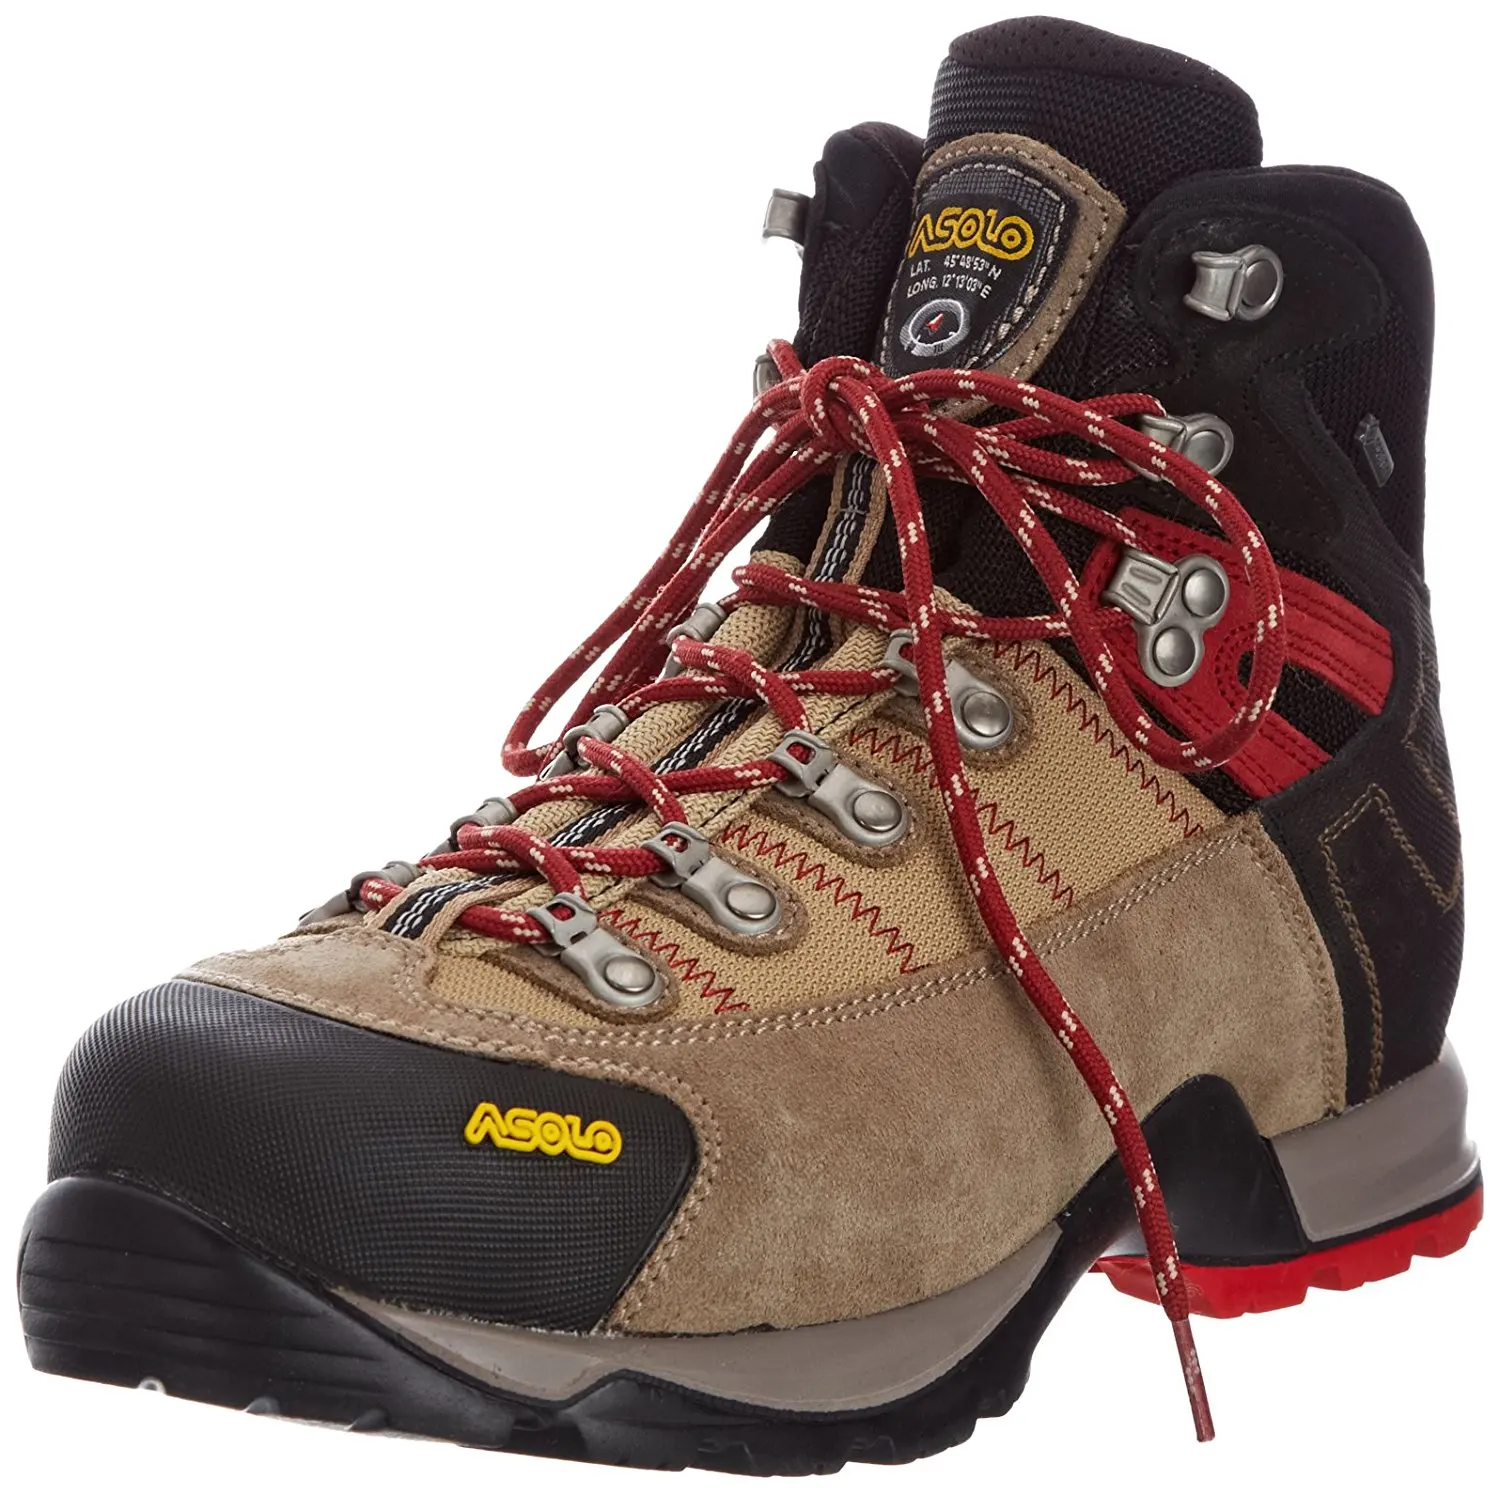 Cheap Asolo Hiking Boots Clearance 